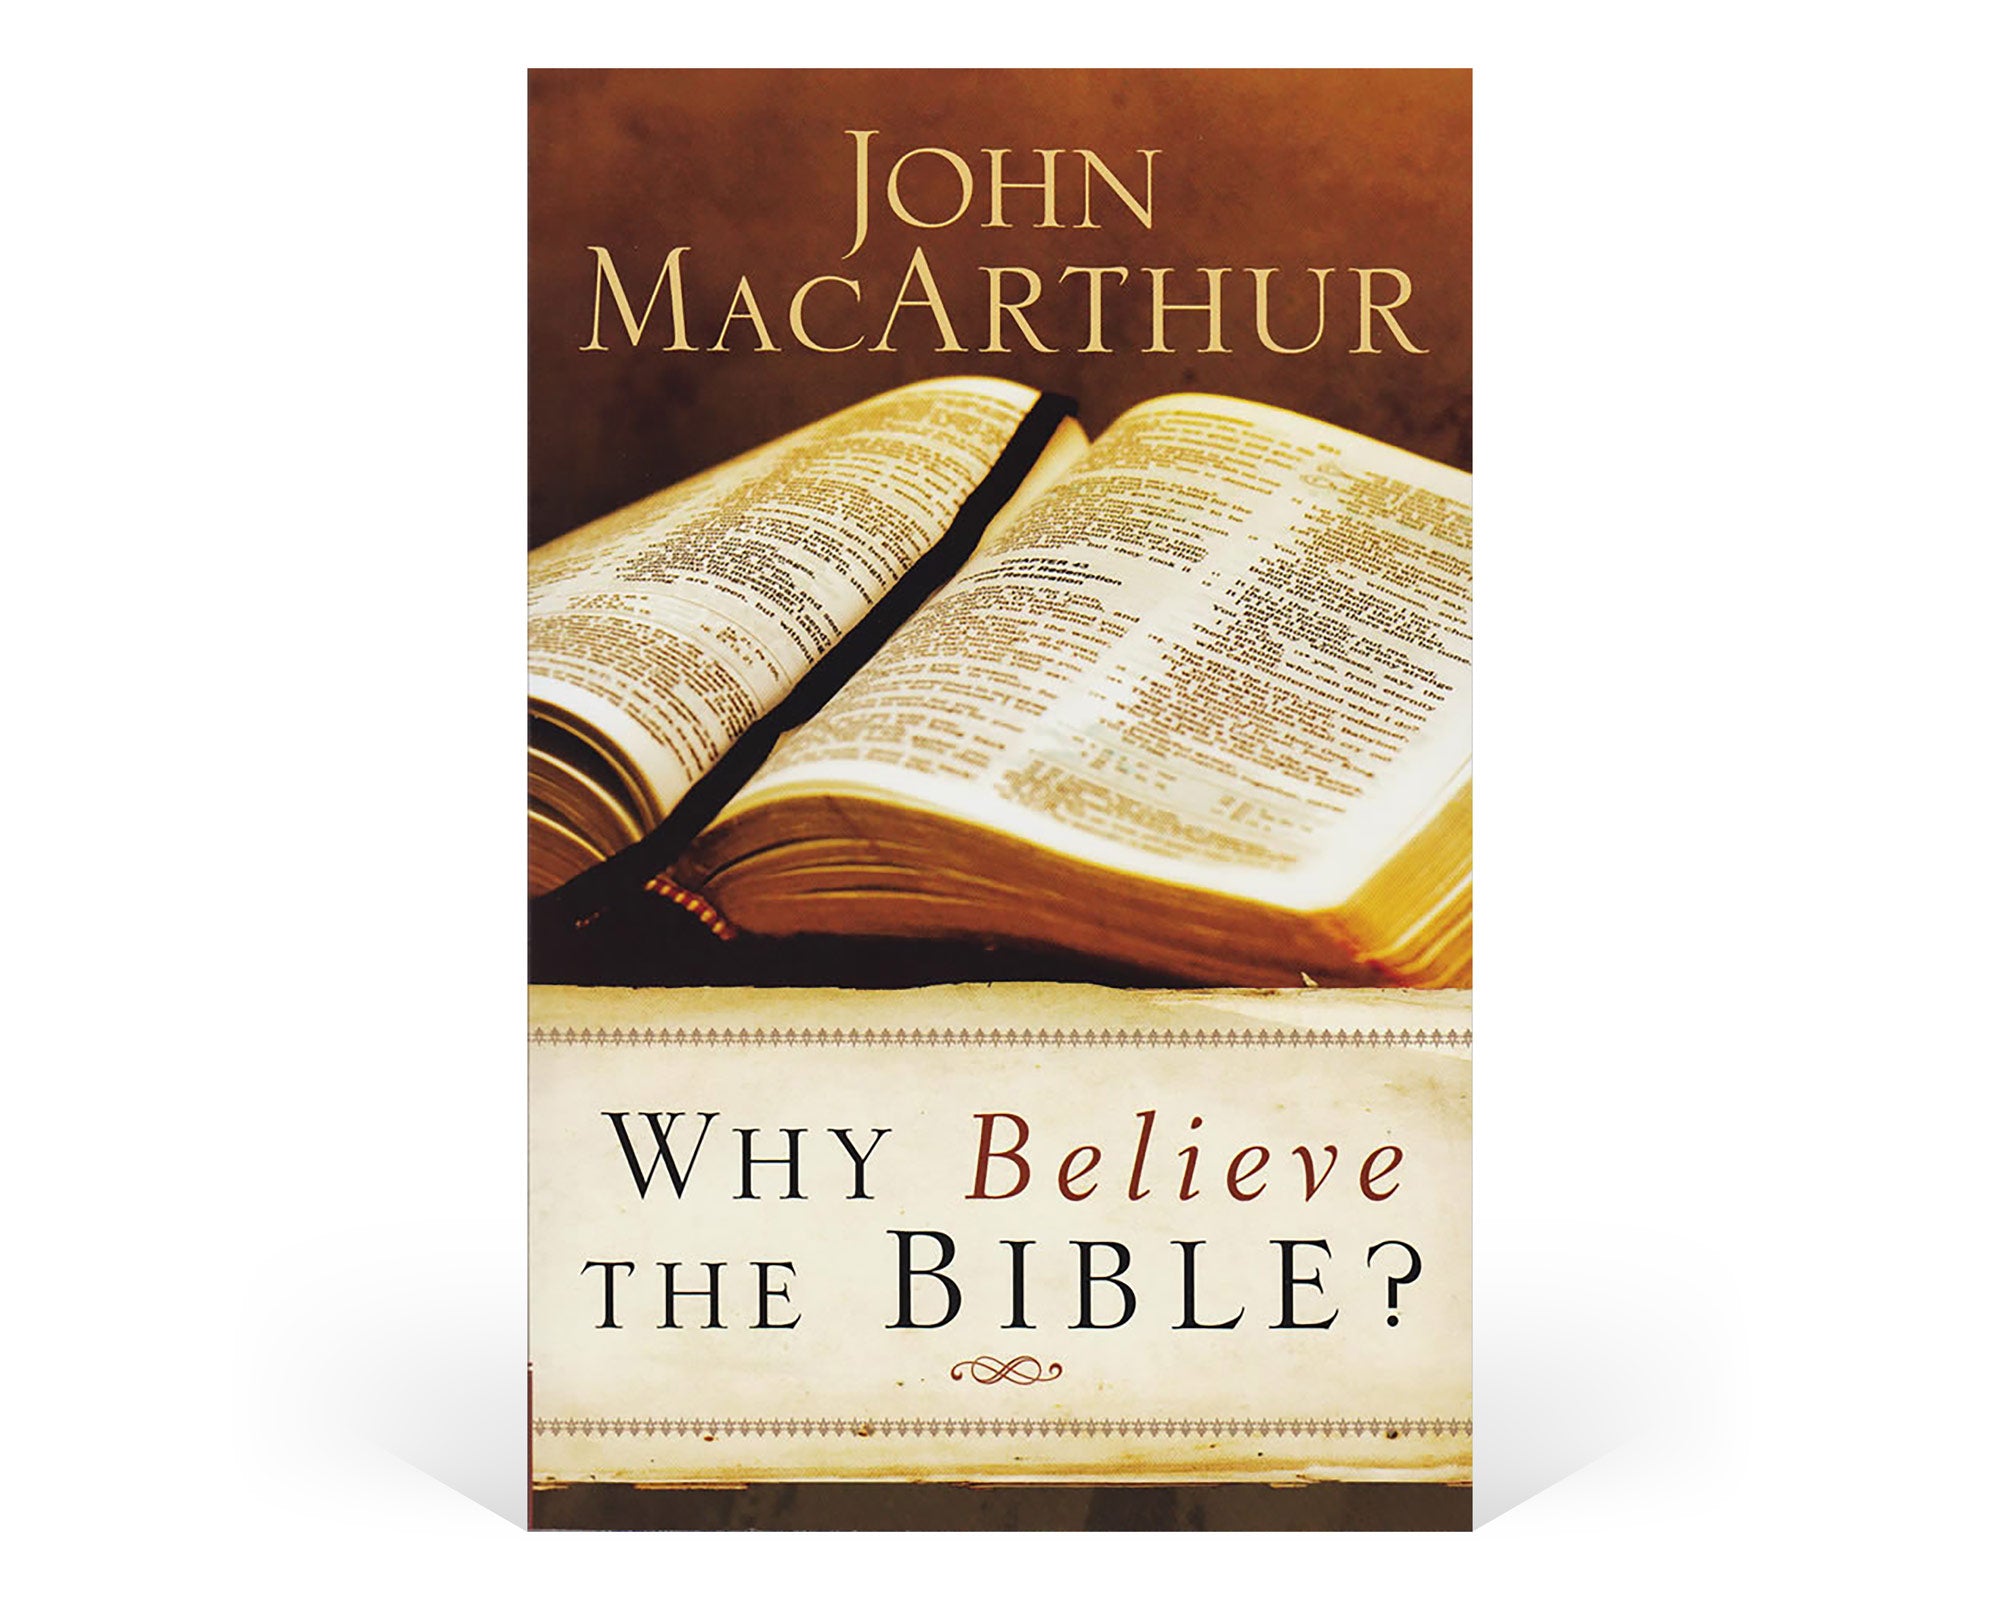 Why believe the Bible?